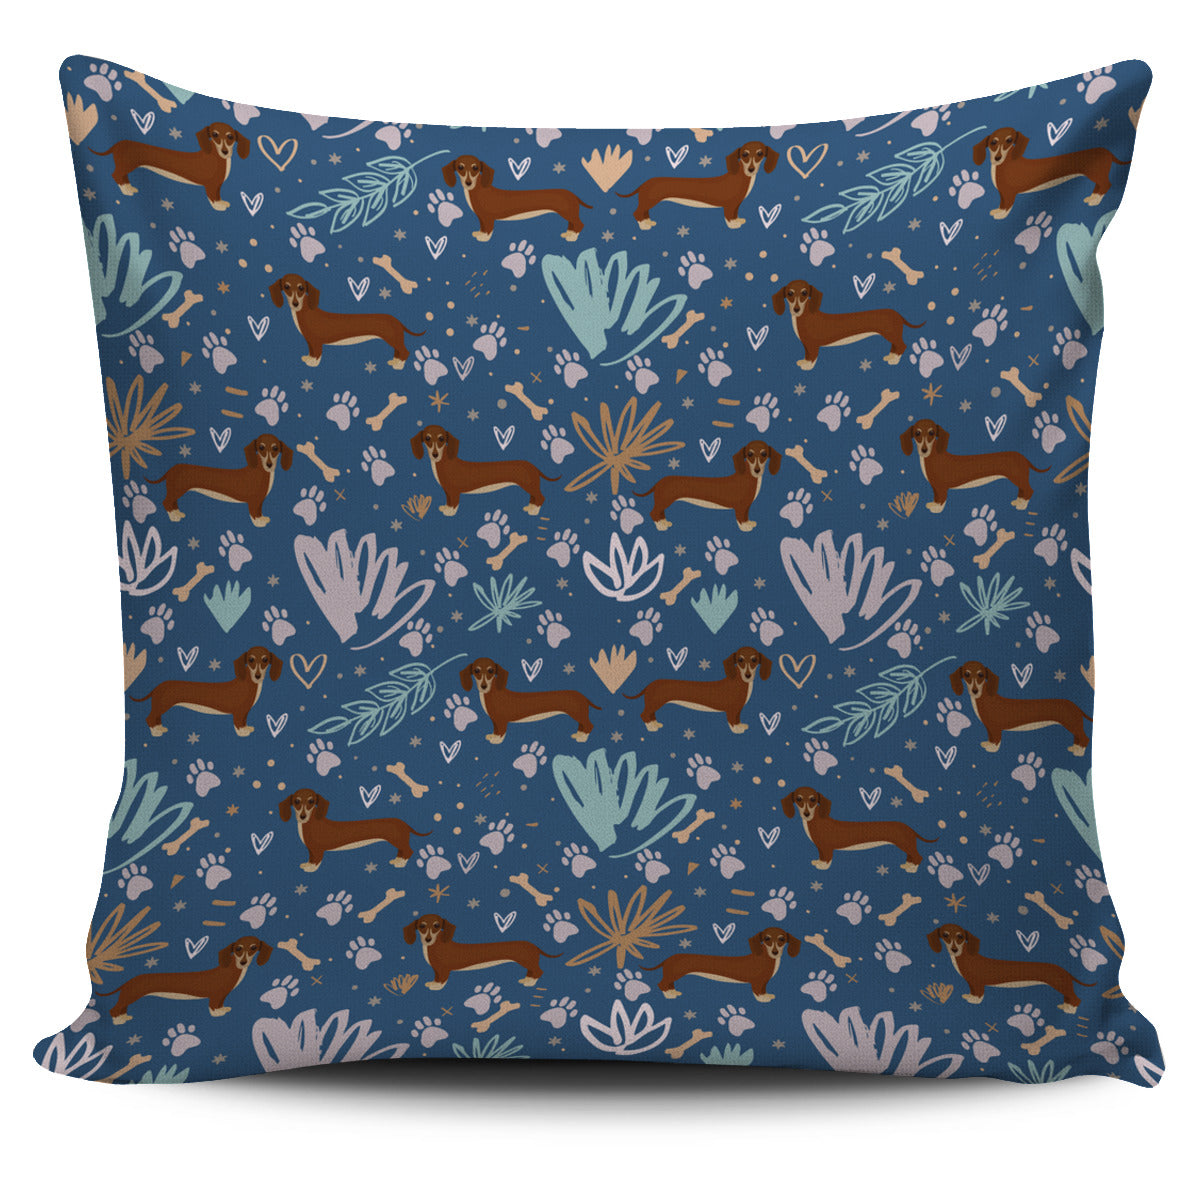 Playful Dachshund Pillow Cover